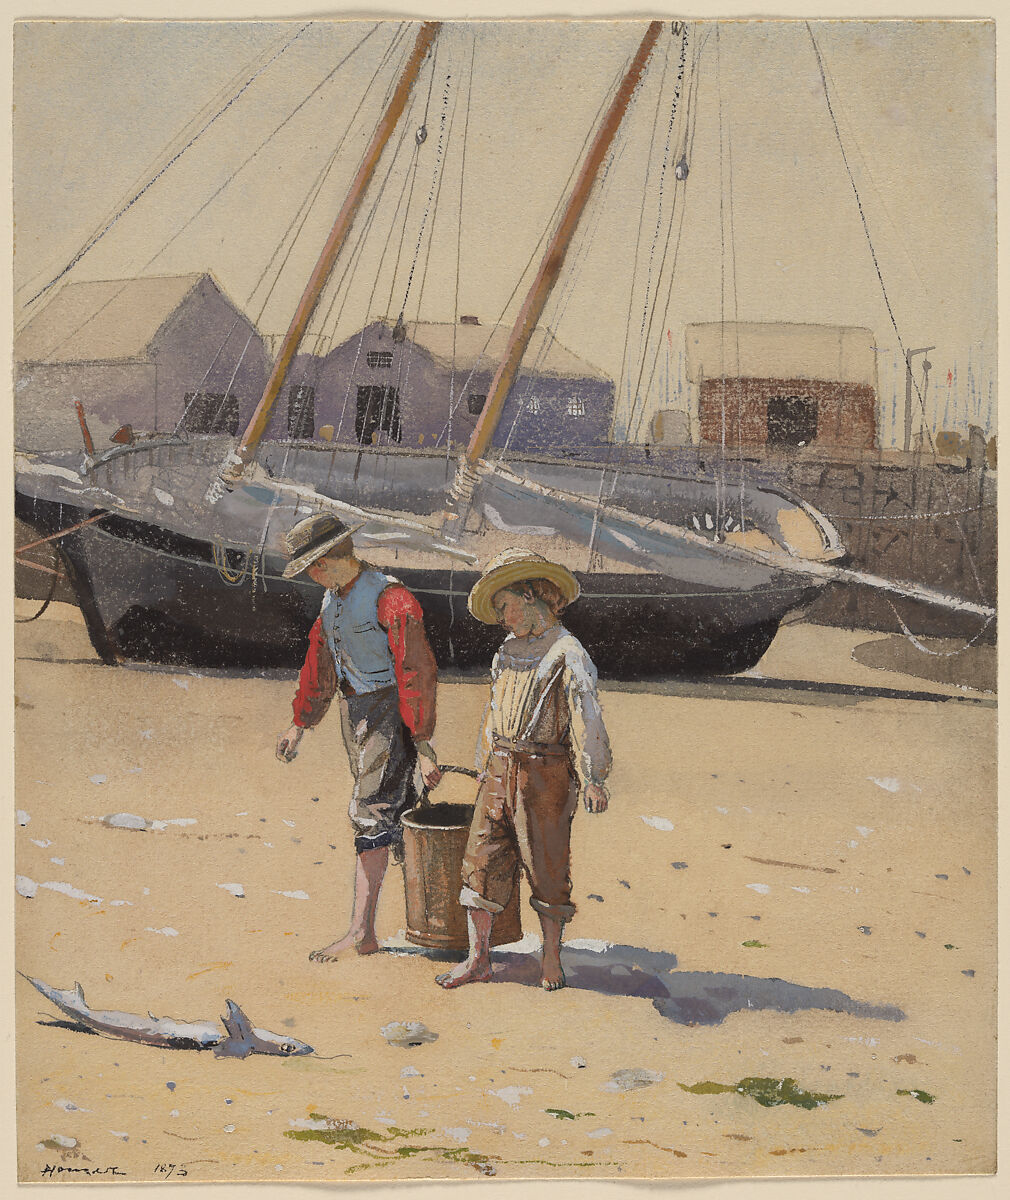 A Basket of Clams, Winslow Homer, Watercolor on wove paper, American